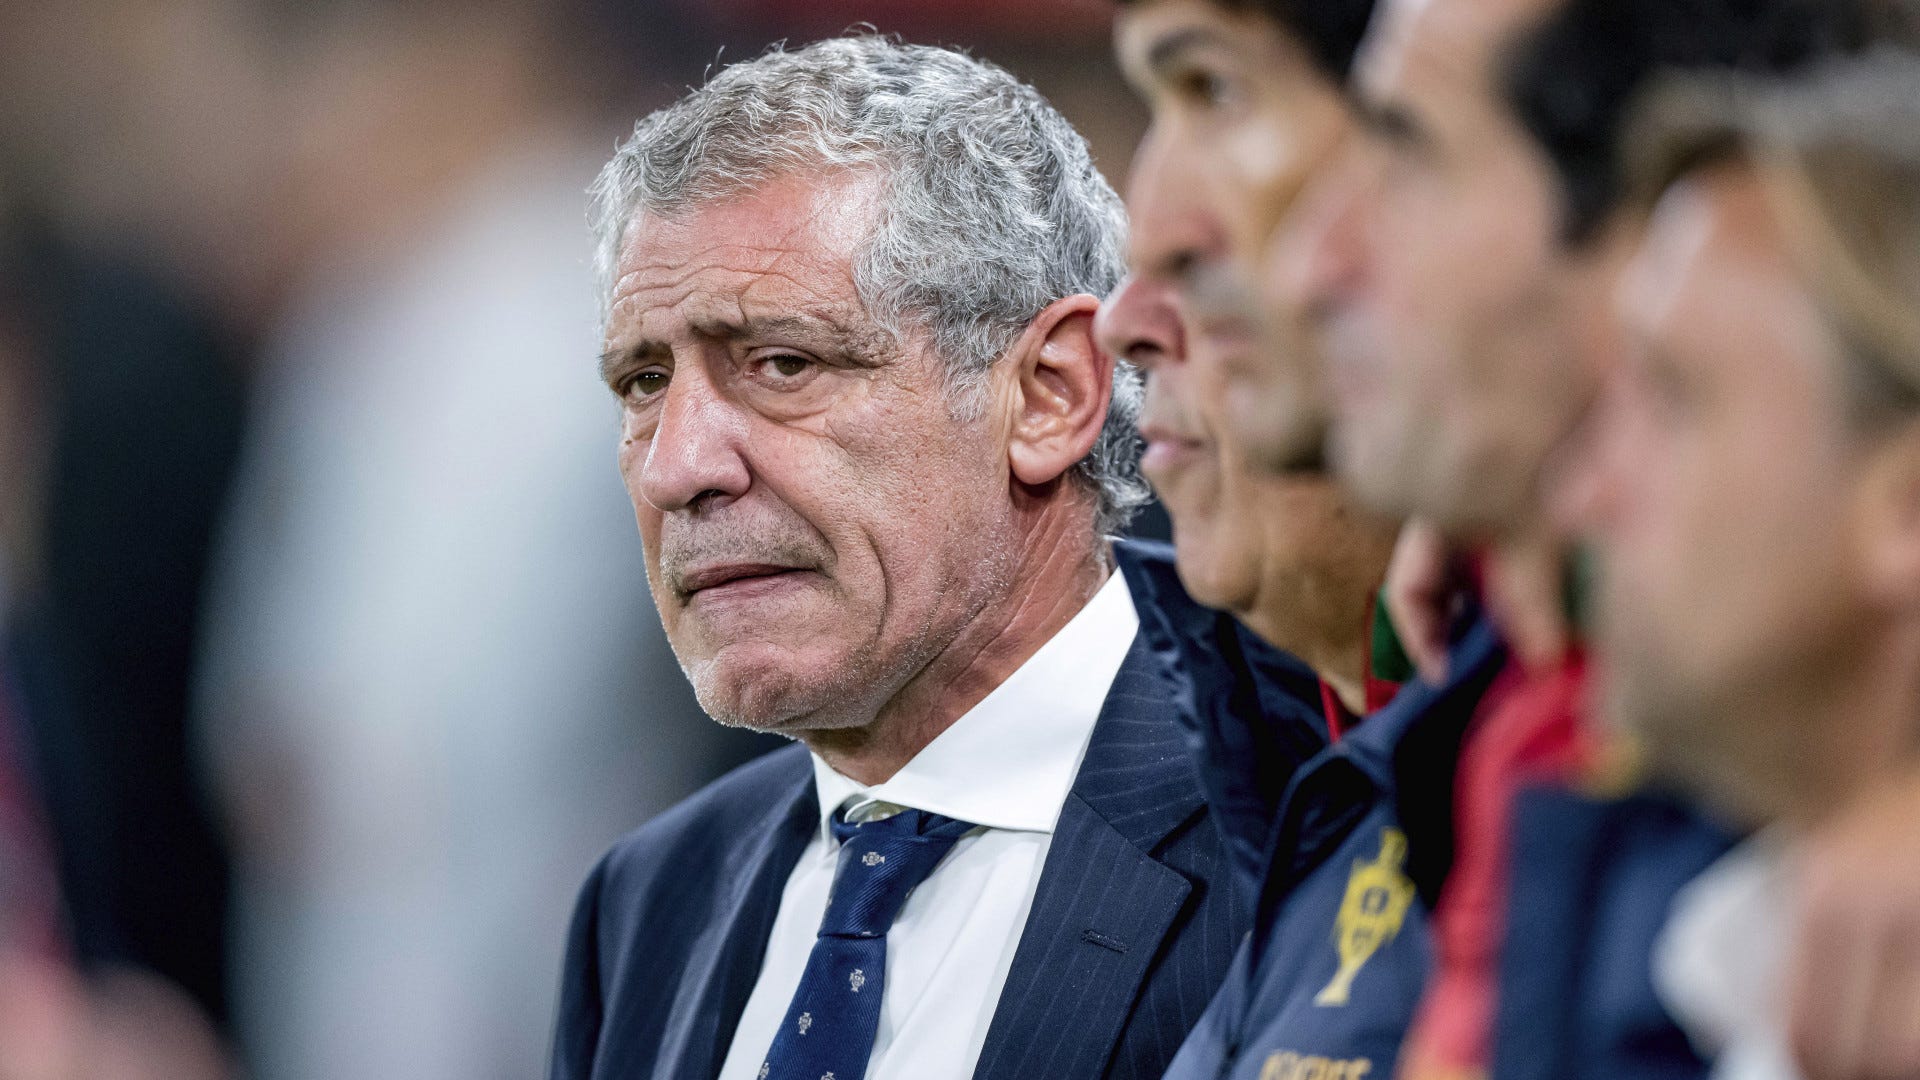 Portugal manager Santos forgot who was on his bench in Nations League match vs Czech Republic | Goal.com UK